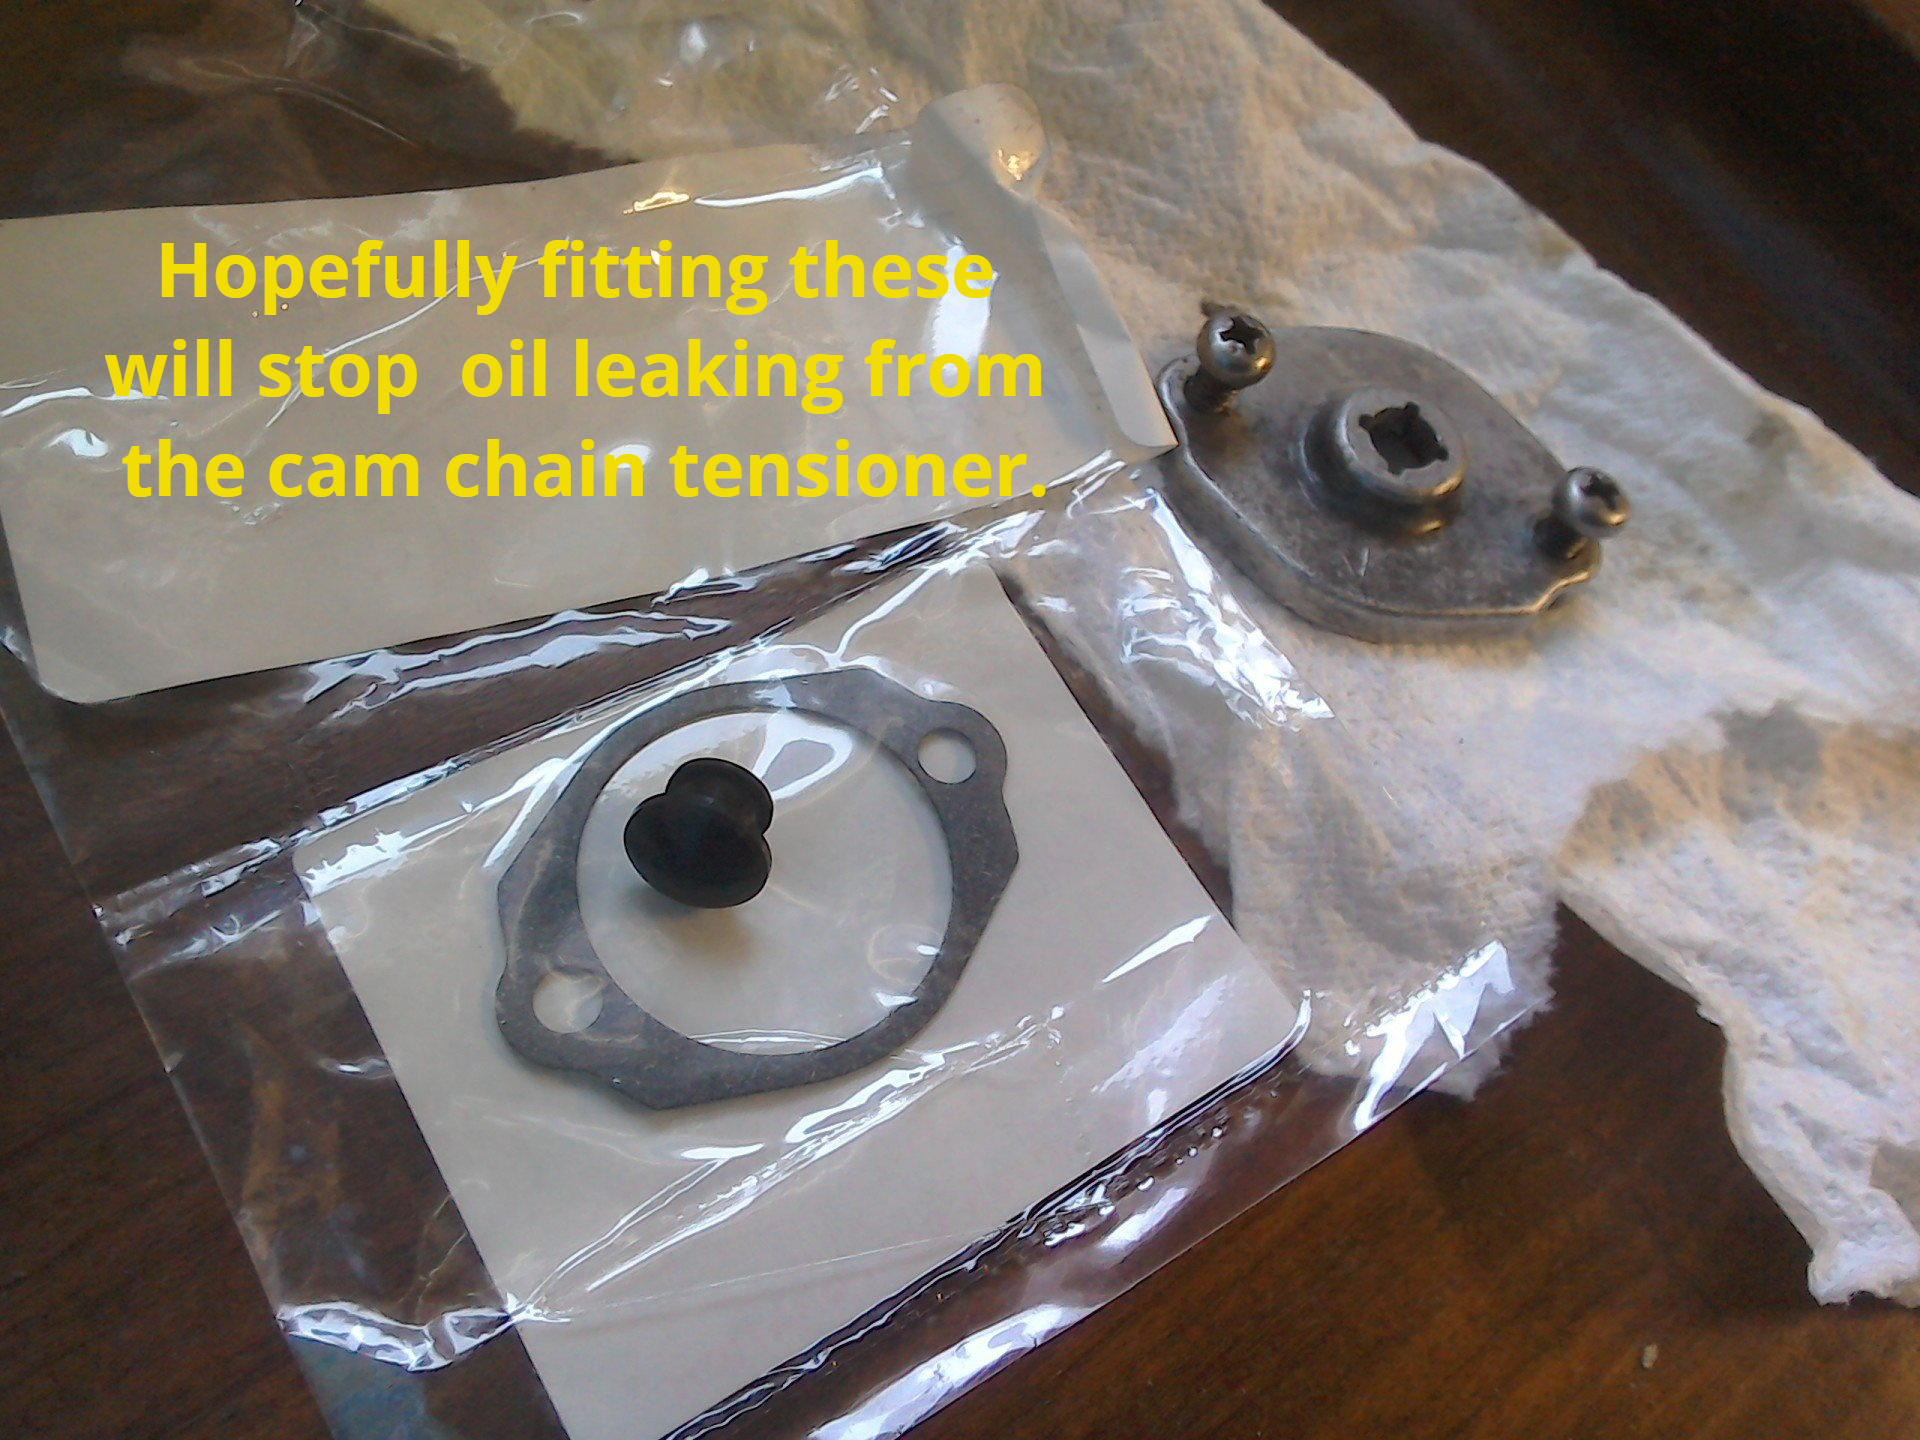 New cam chain tensioner gaskets